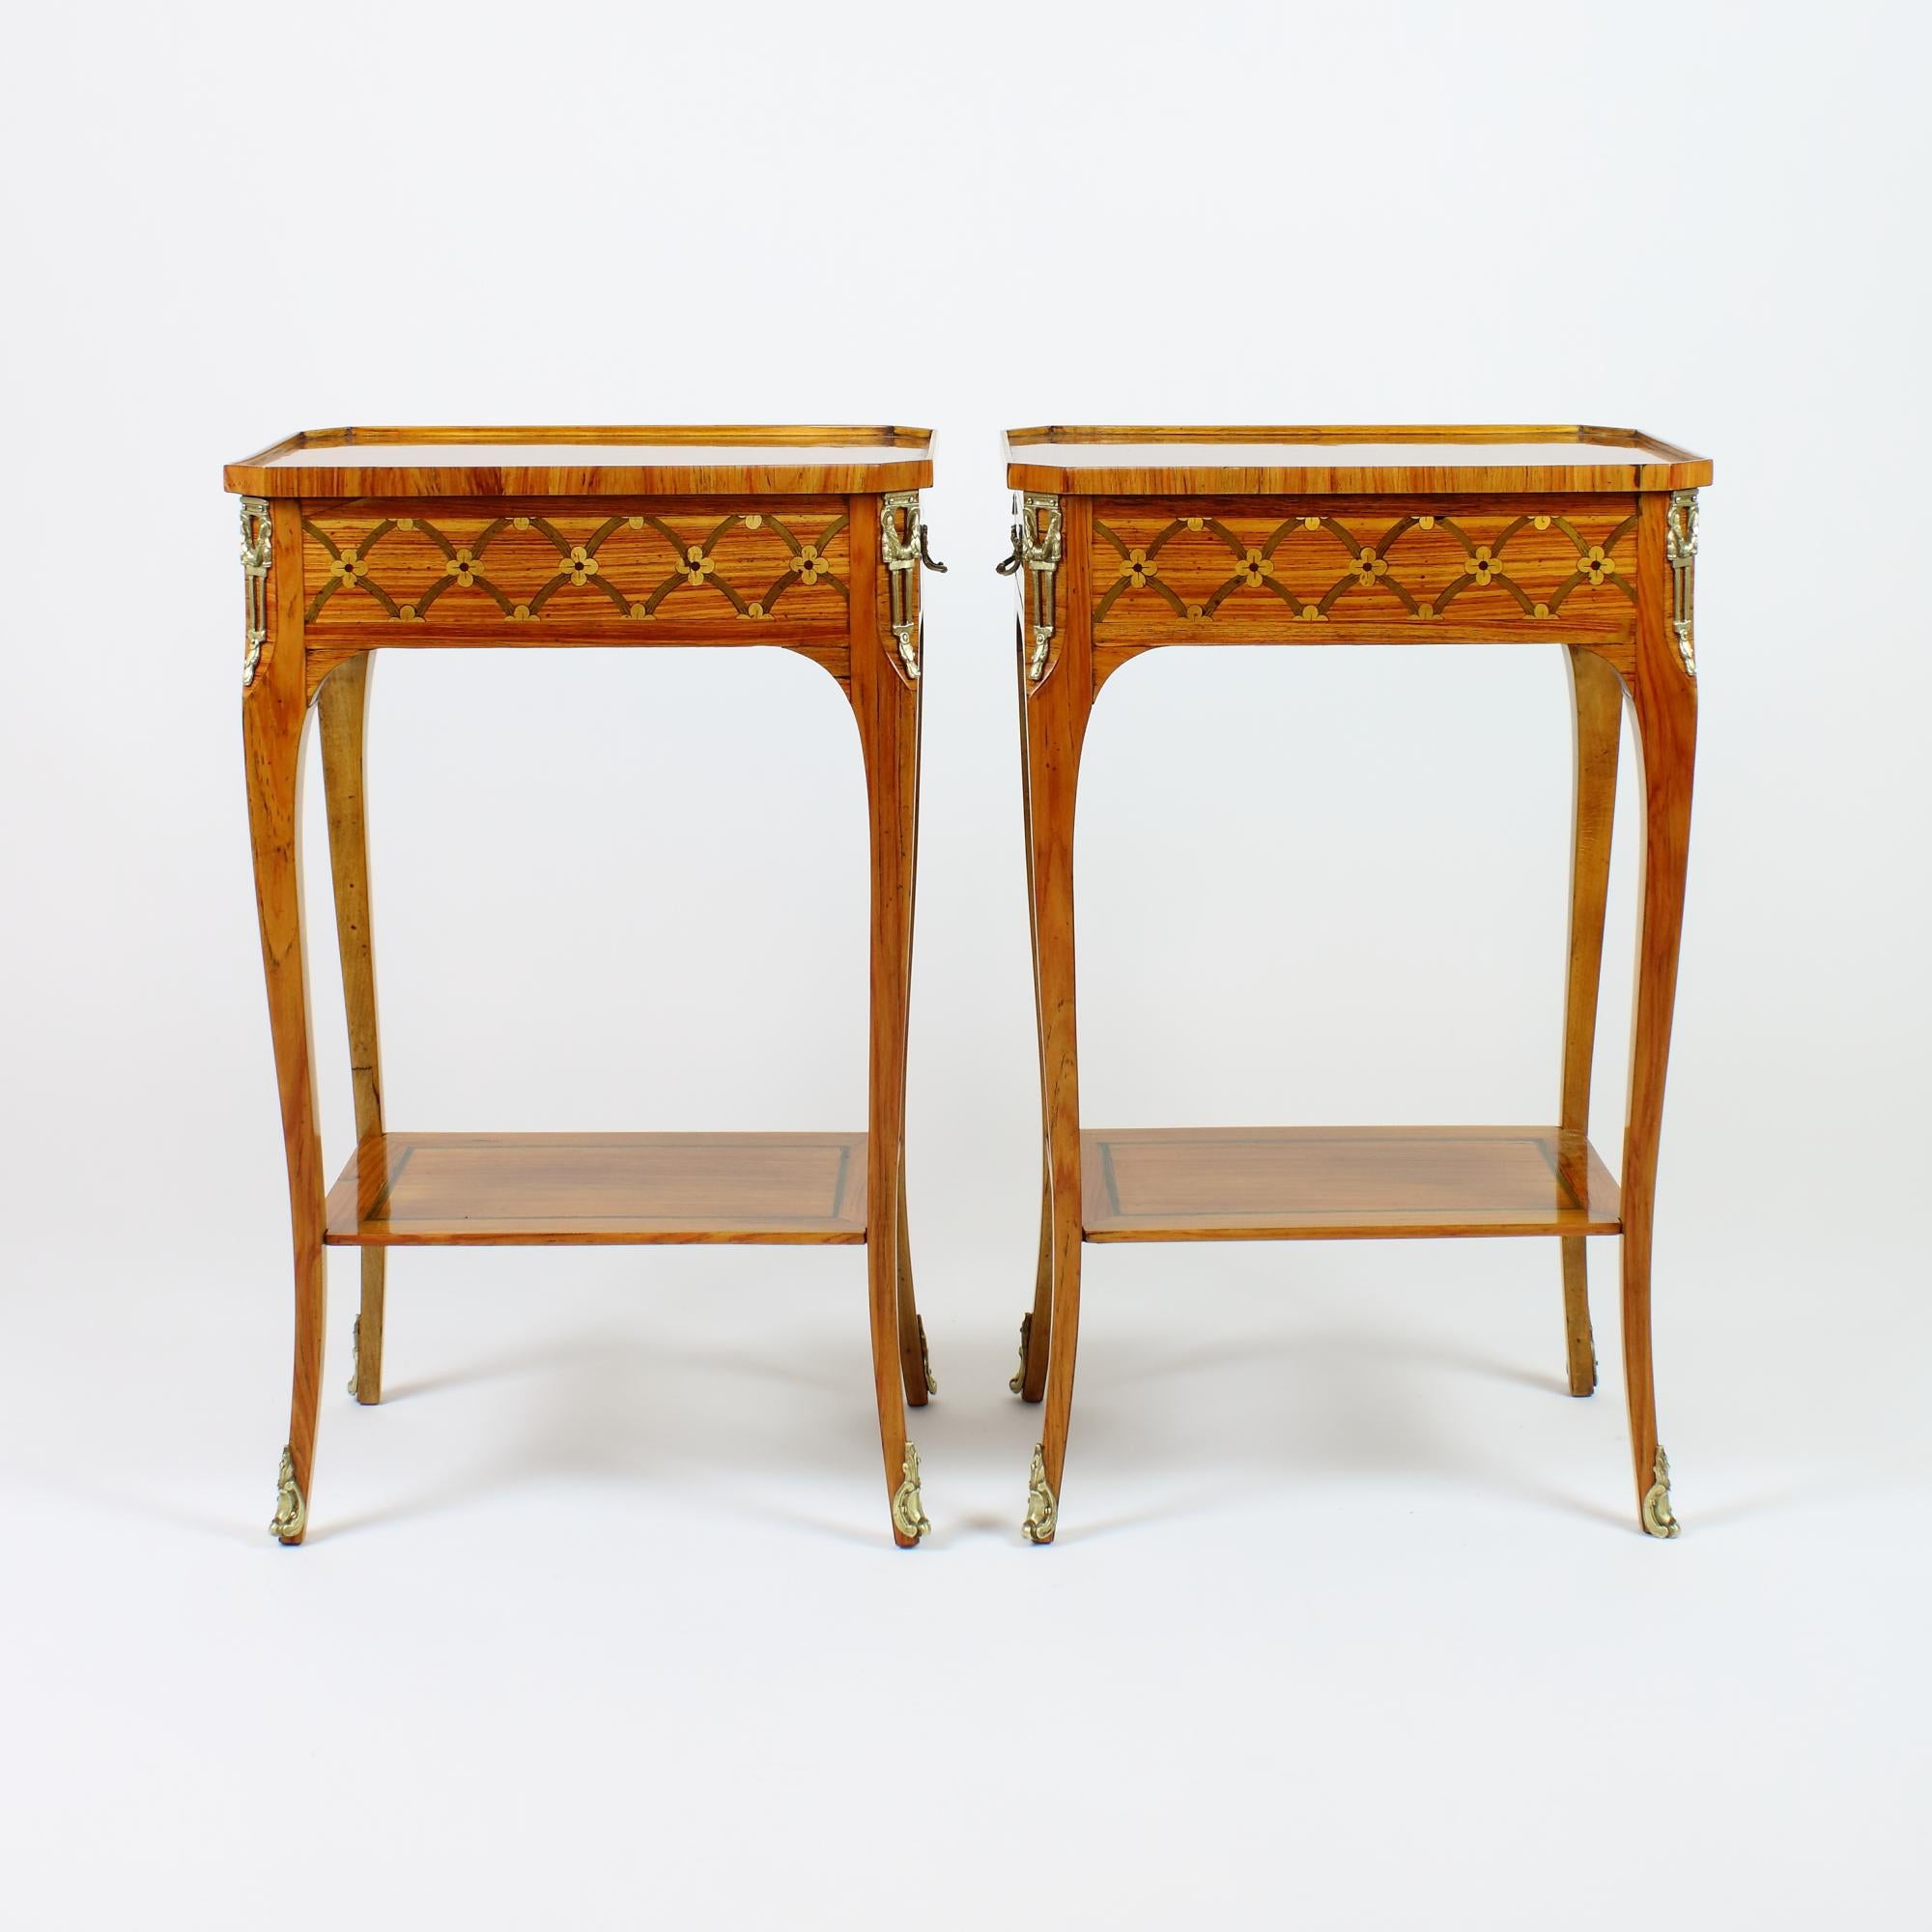 Leather Pair of 19th/20th Century Louis XVI Marquetry Side Tables /Lady's Writing Tables